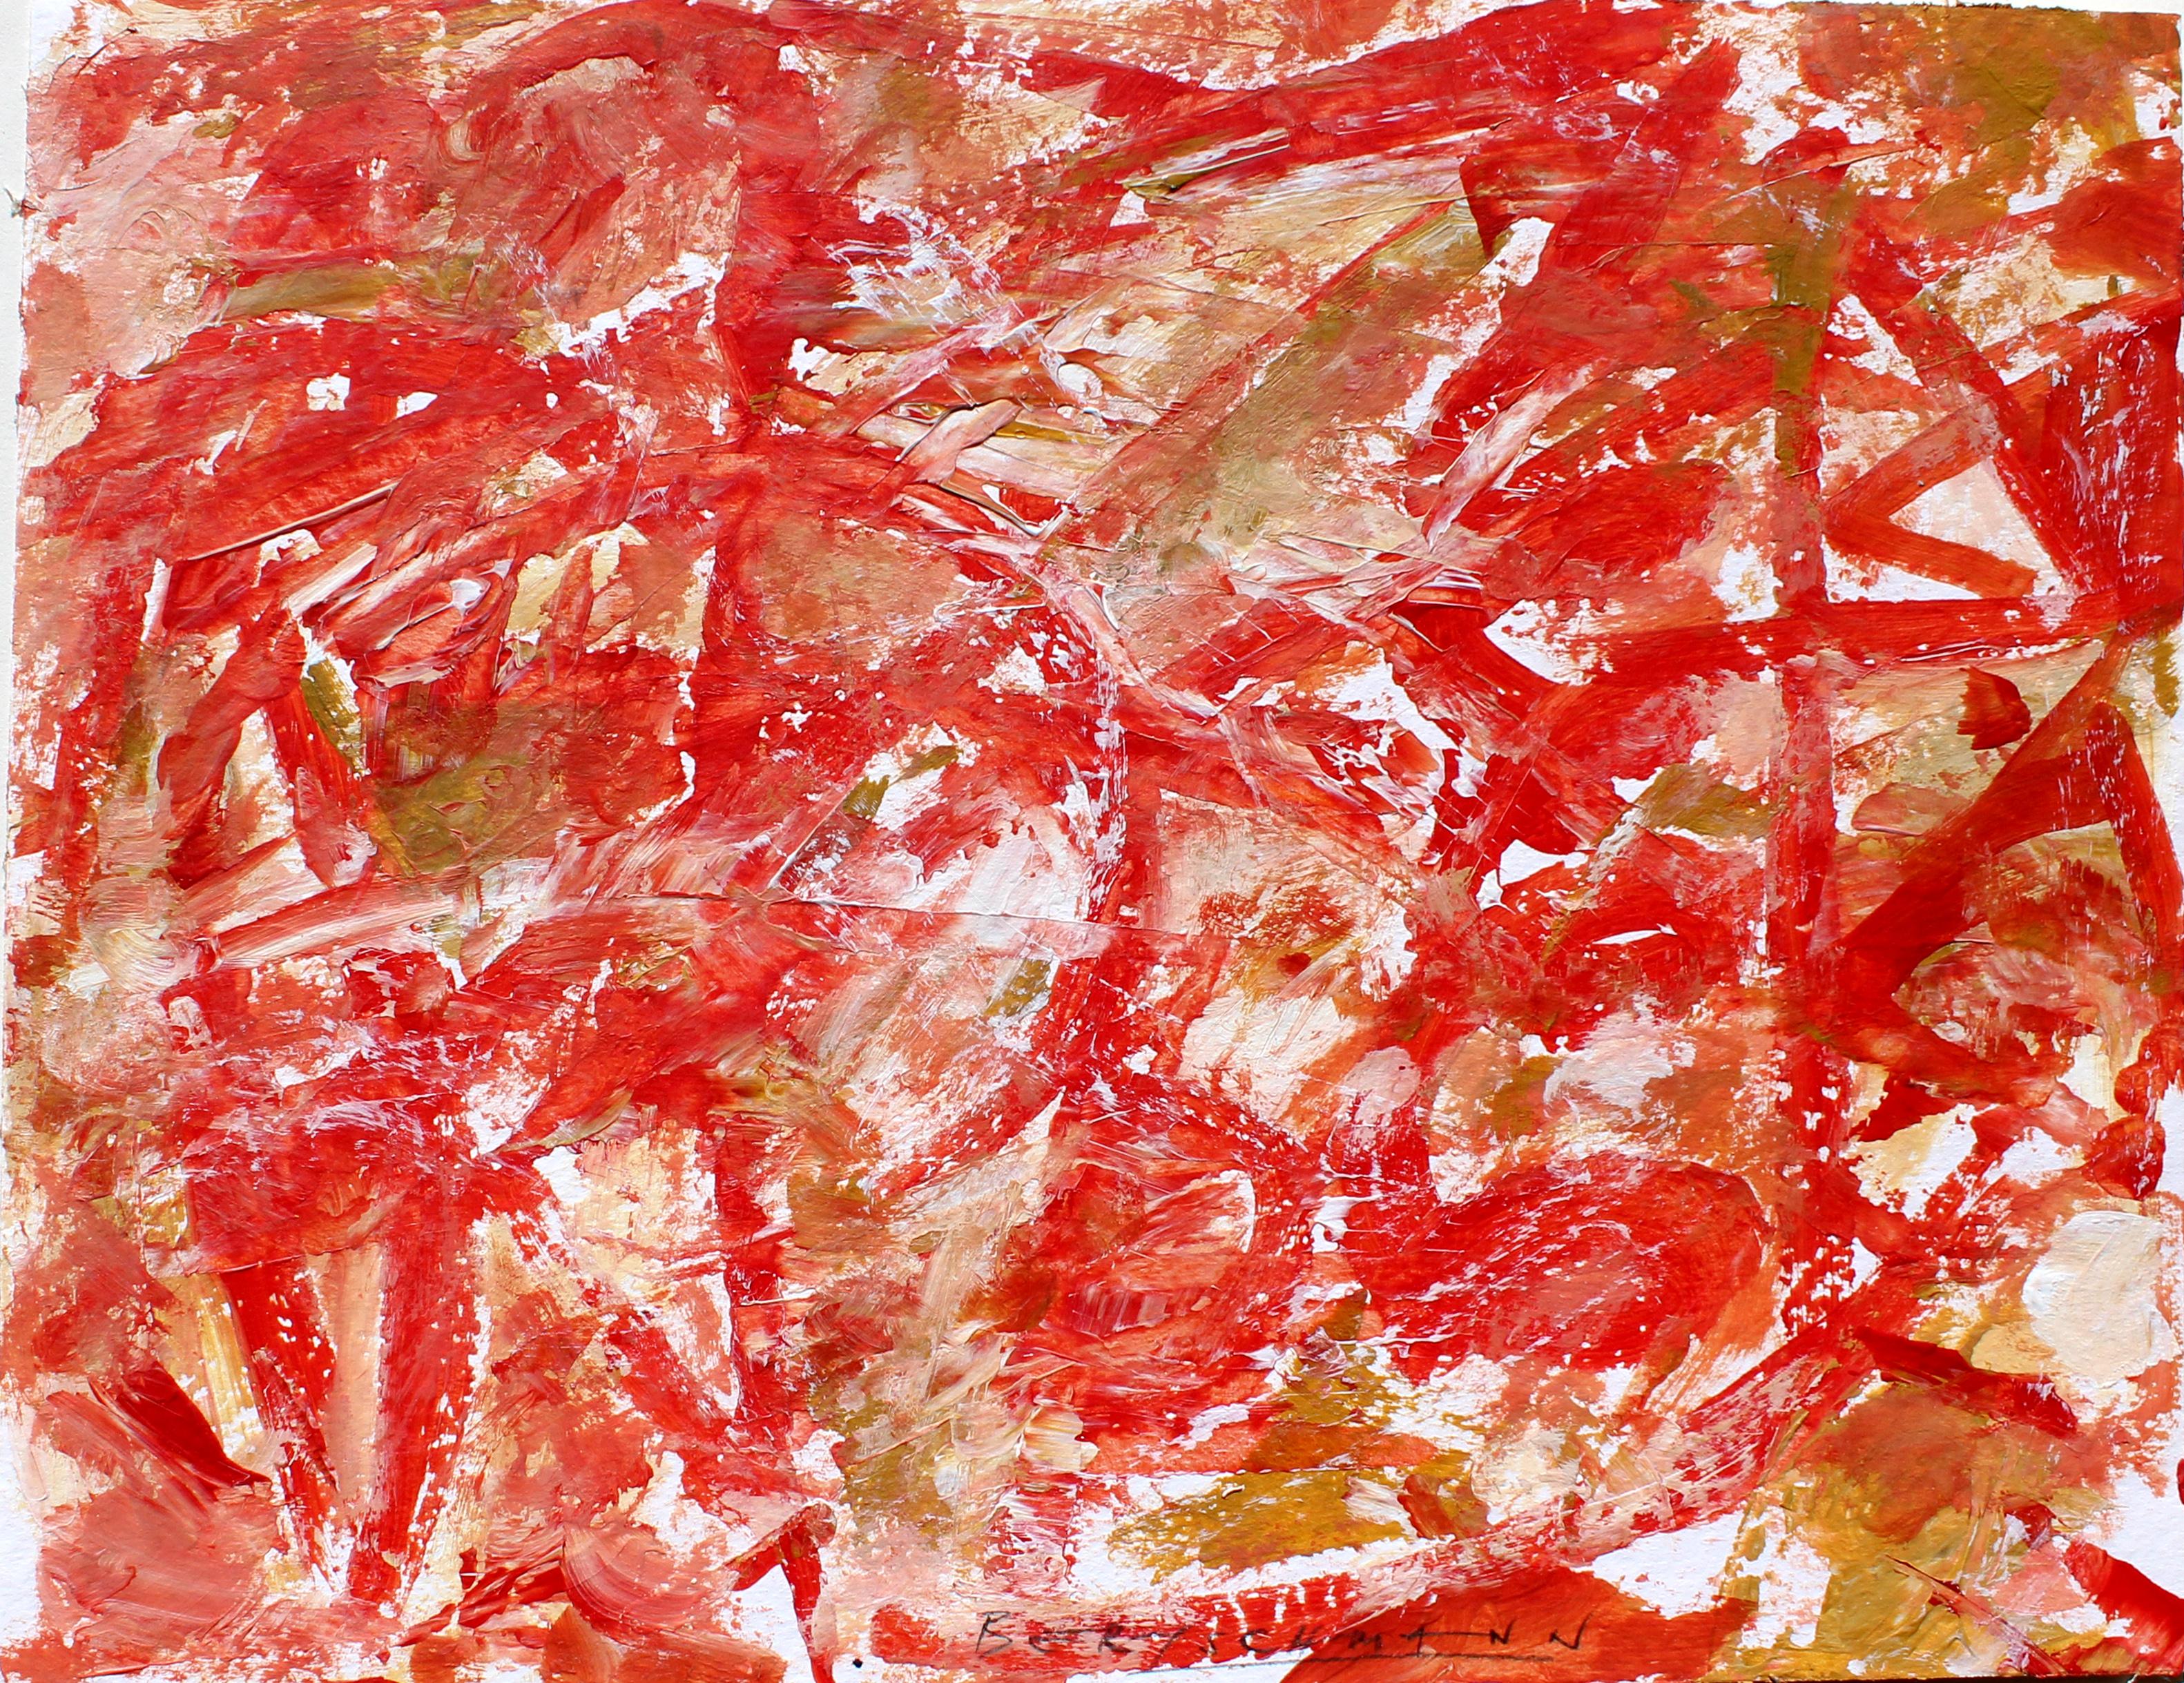 Red and Tan, Untitled, archived no. 47 - Painting by Harry Bertschmann